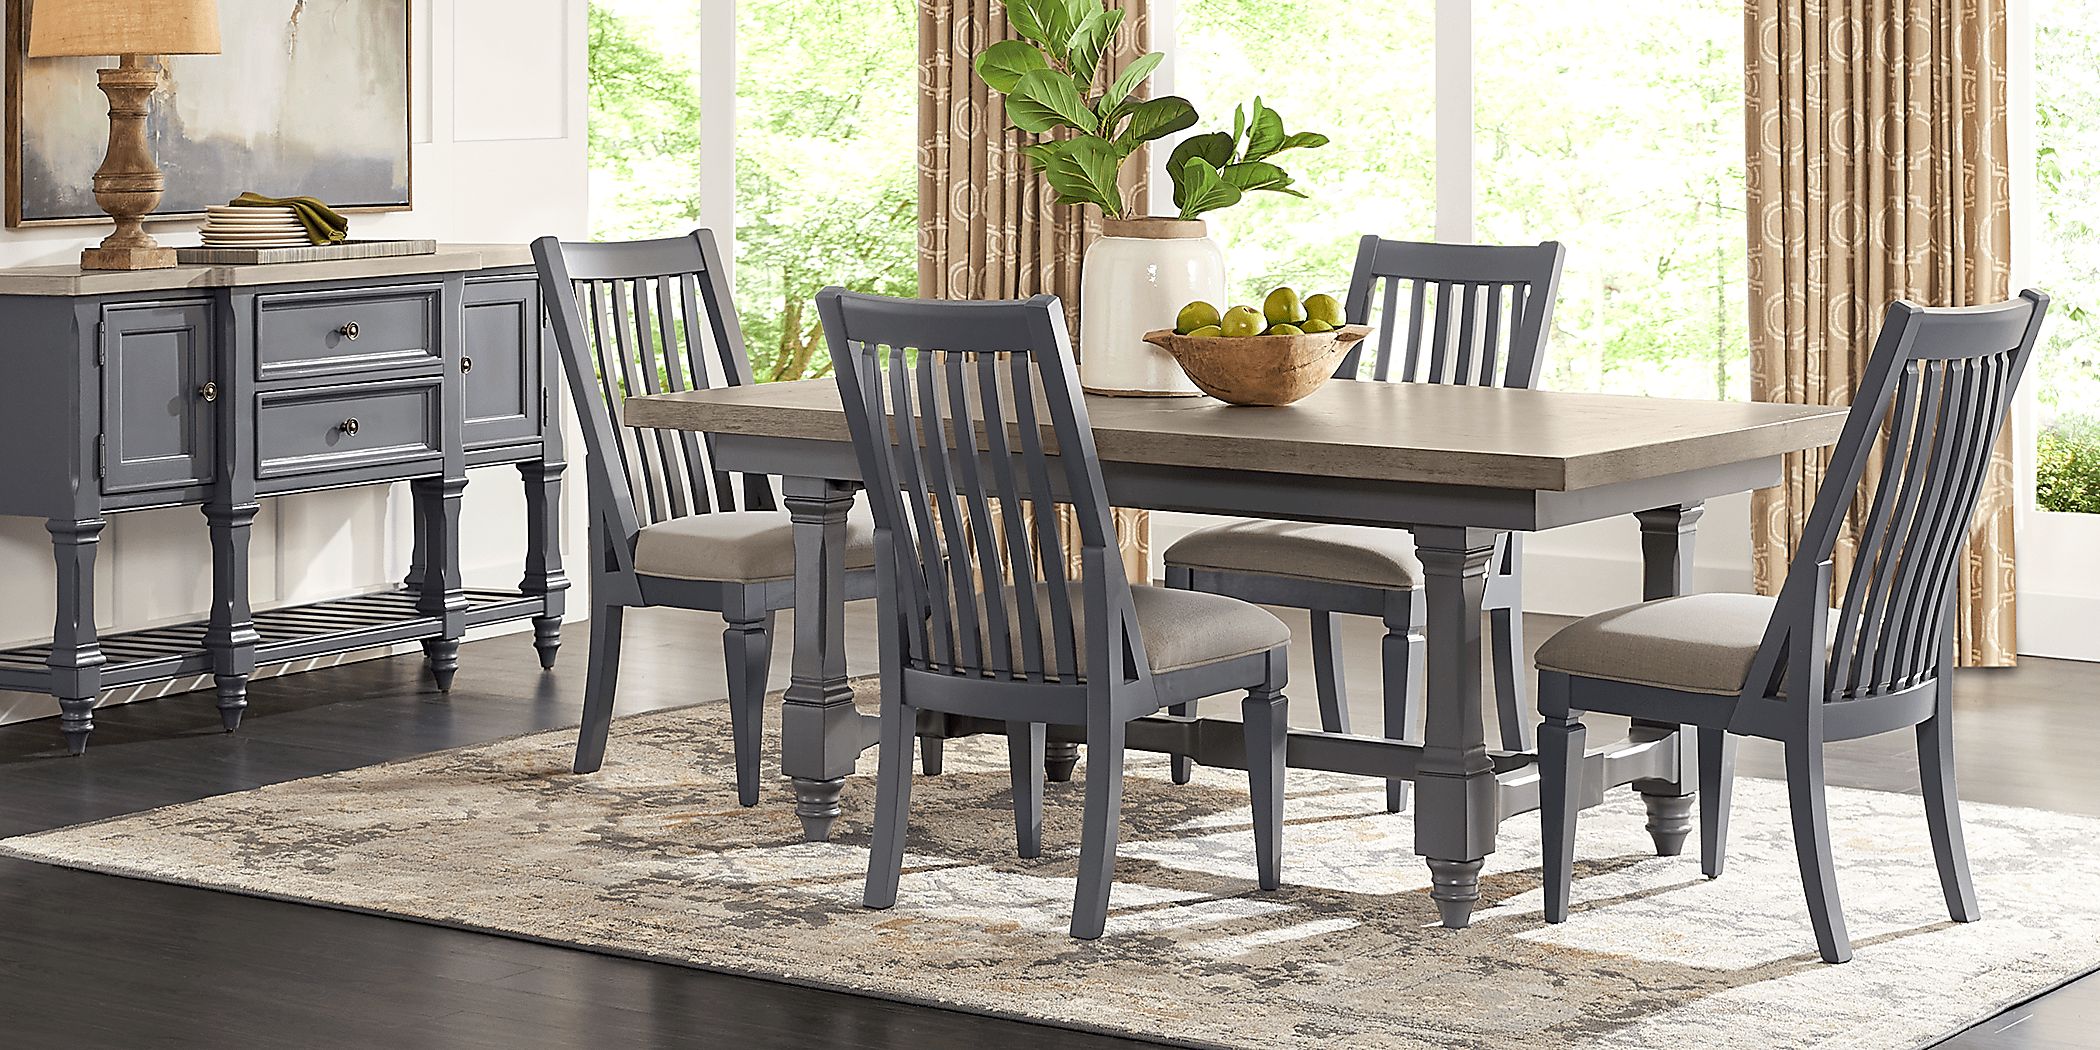 Shorewood Gray Side Chair